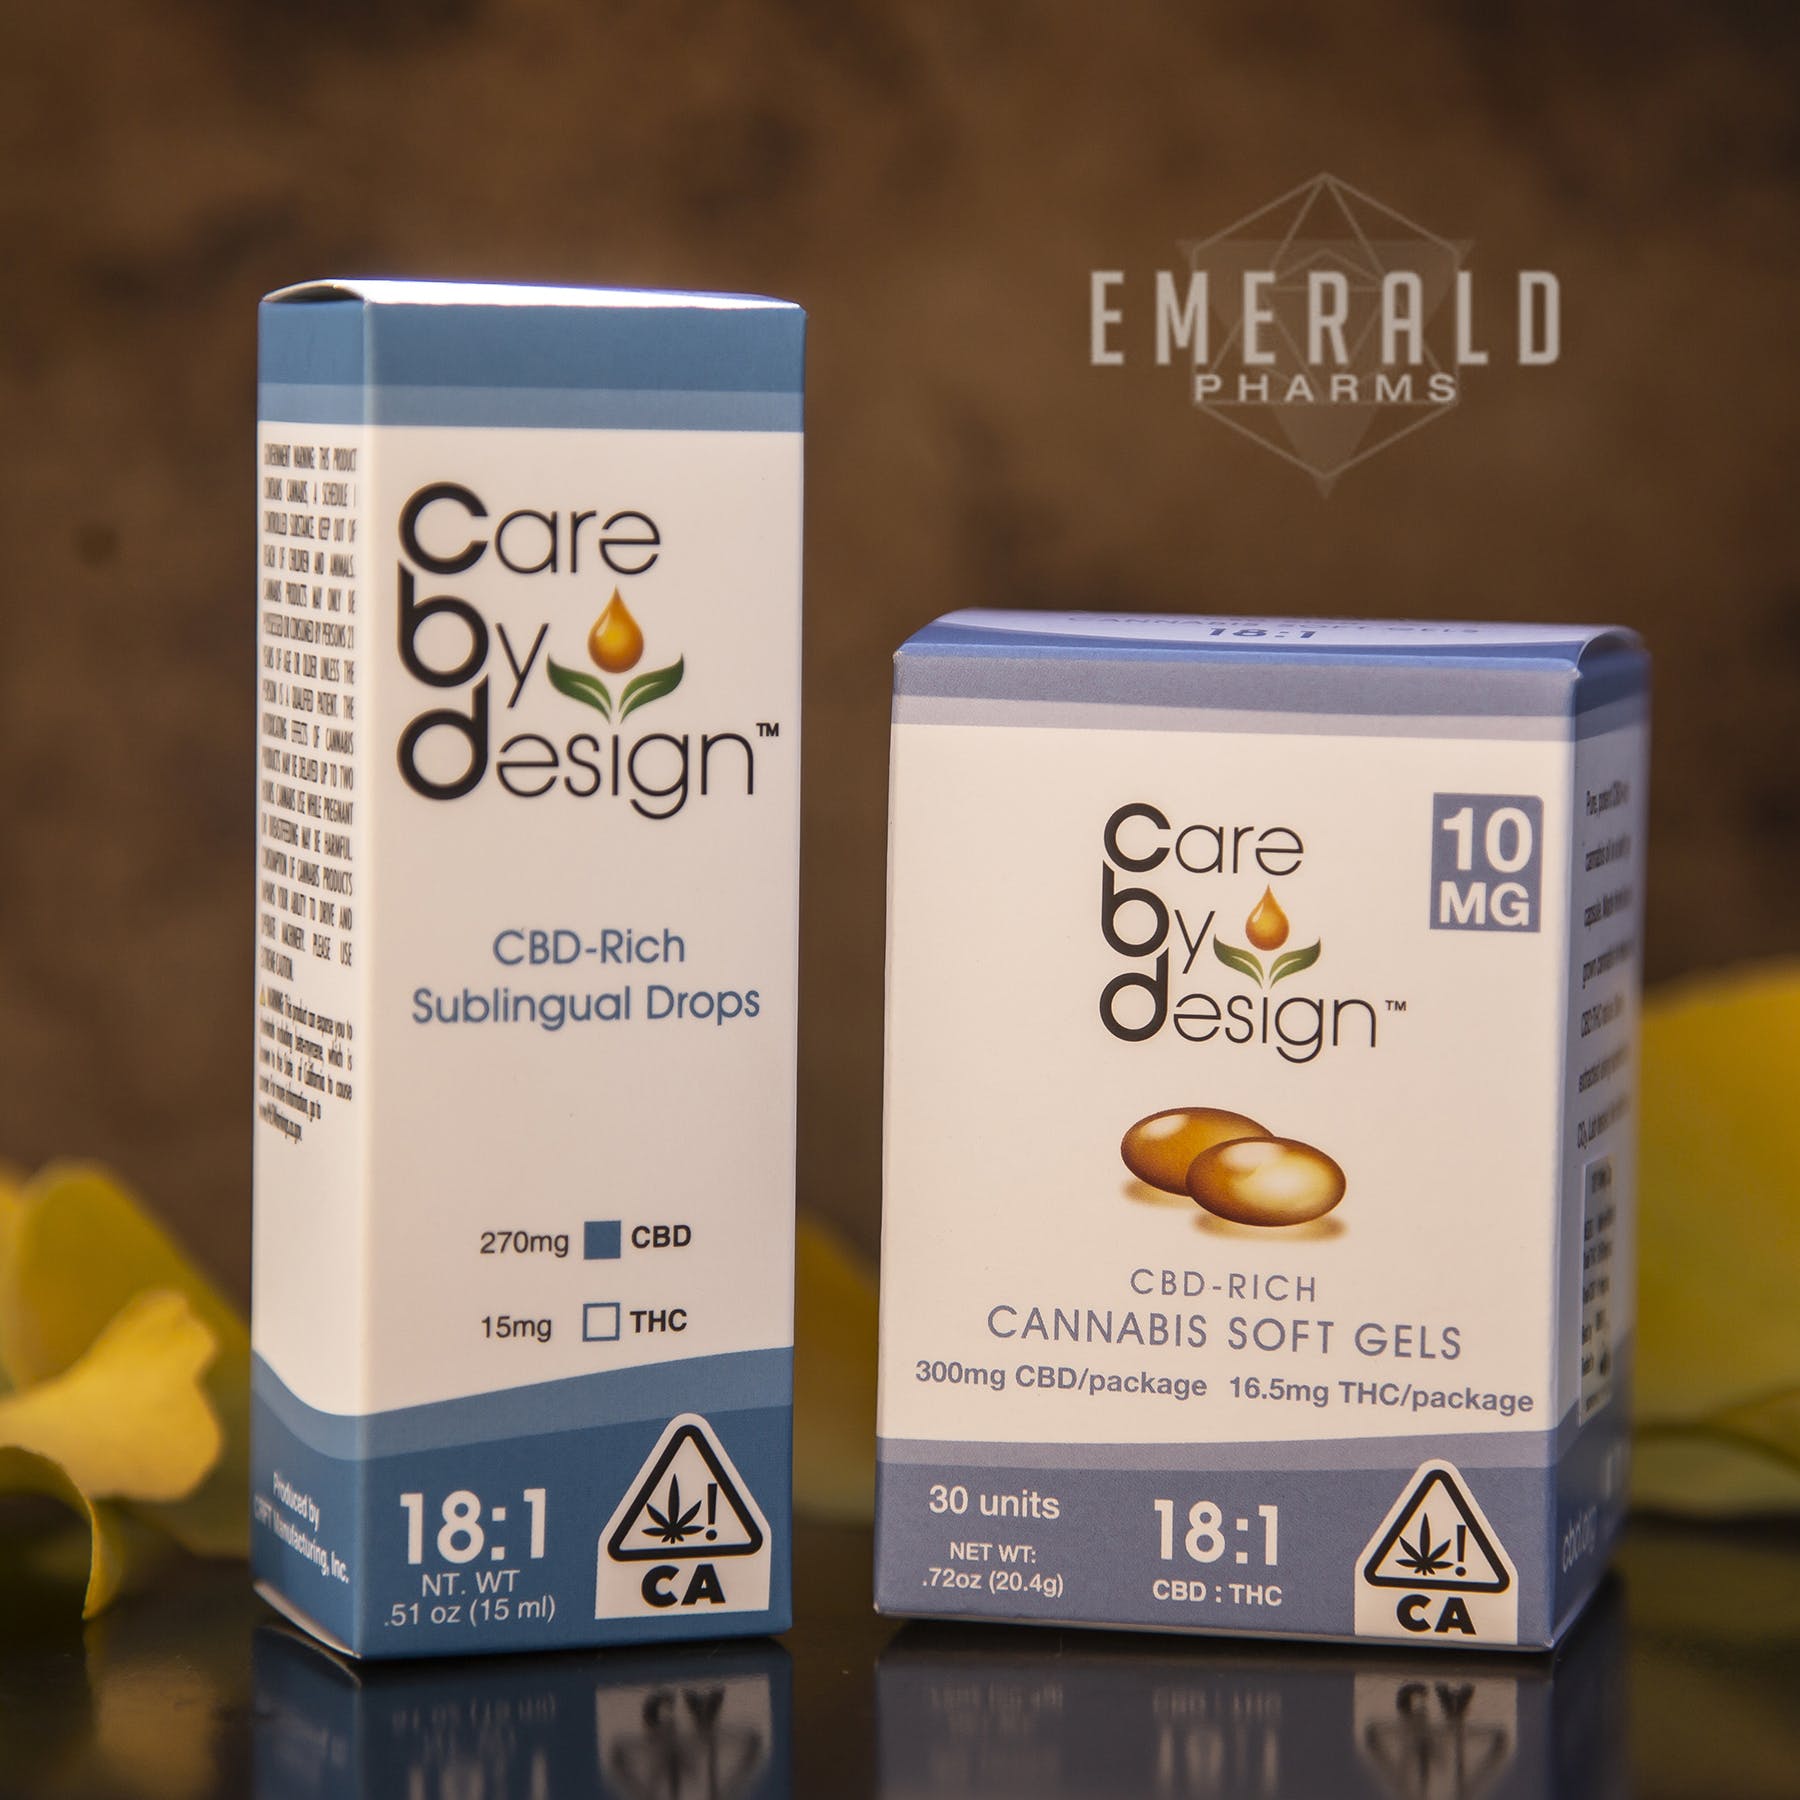 Care By Design: 18:1 CBD Cannabis Soft Gels 10 mg (30 capsules)